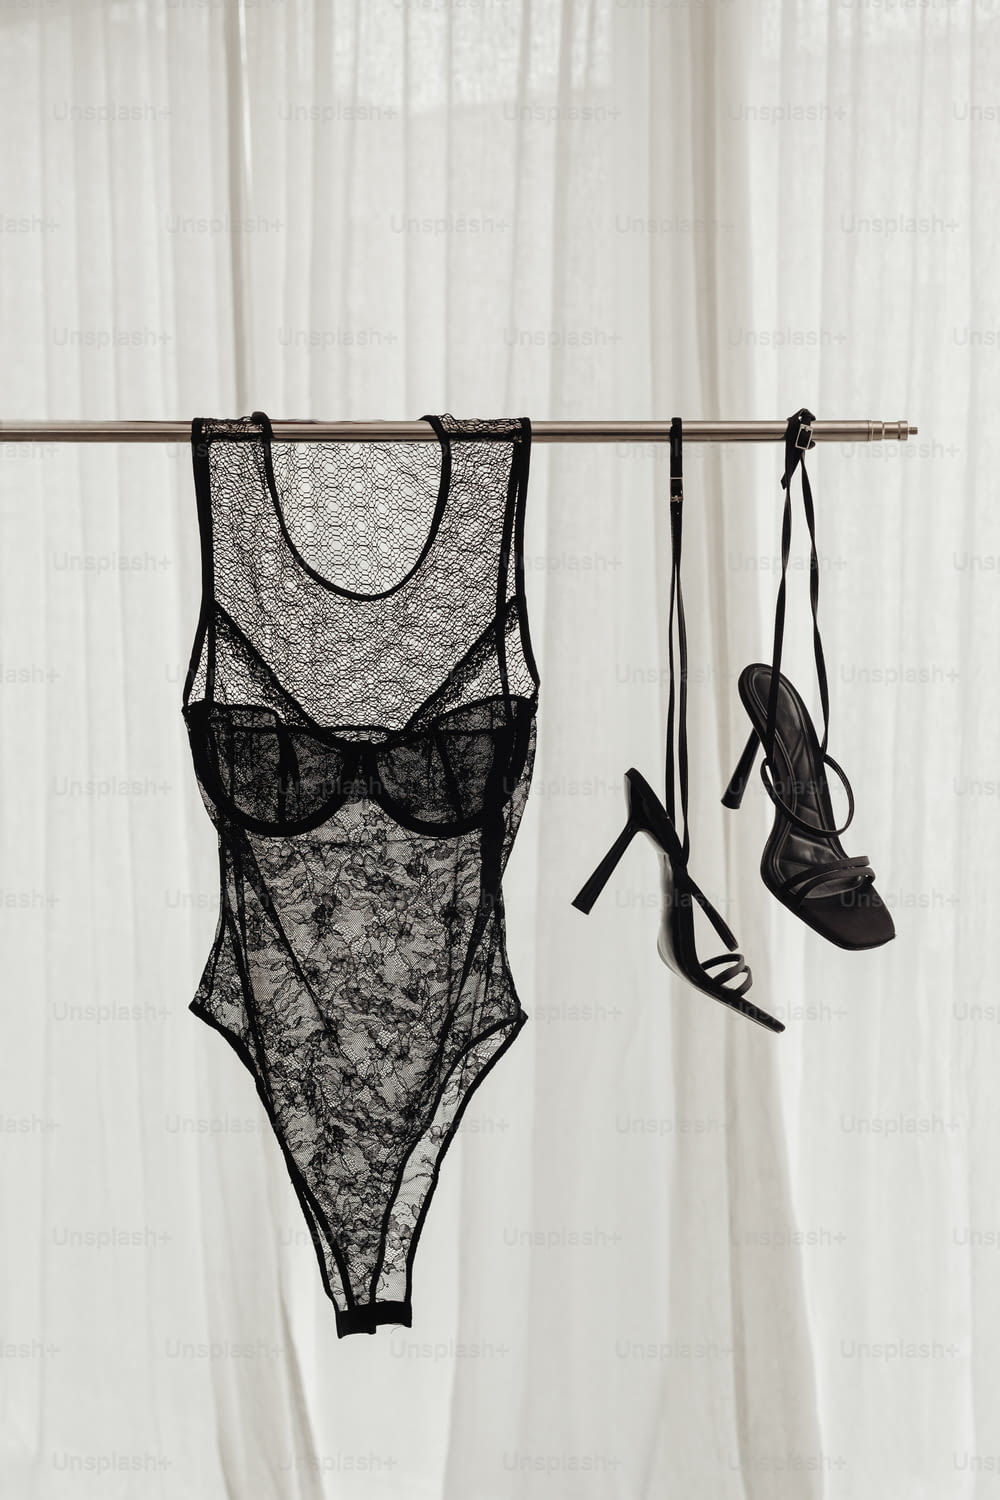 a pair of lingerie bras hanging from a clothes line